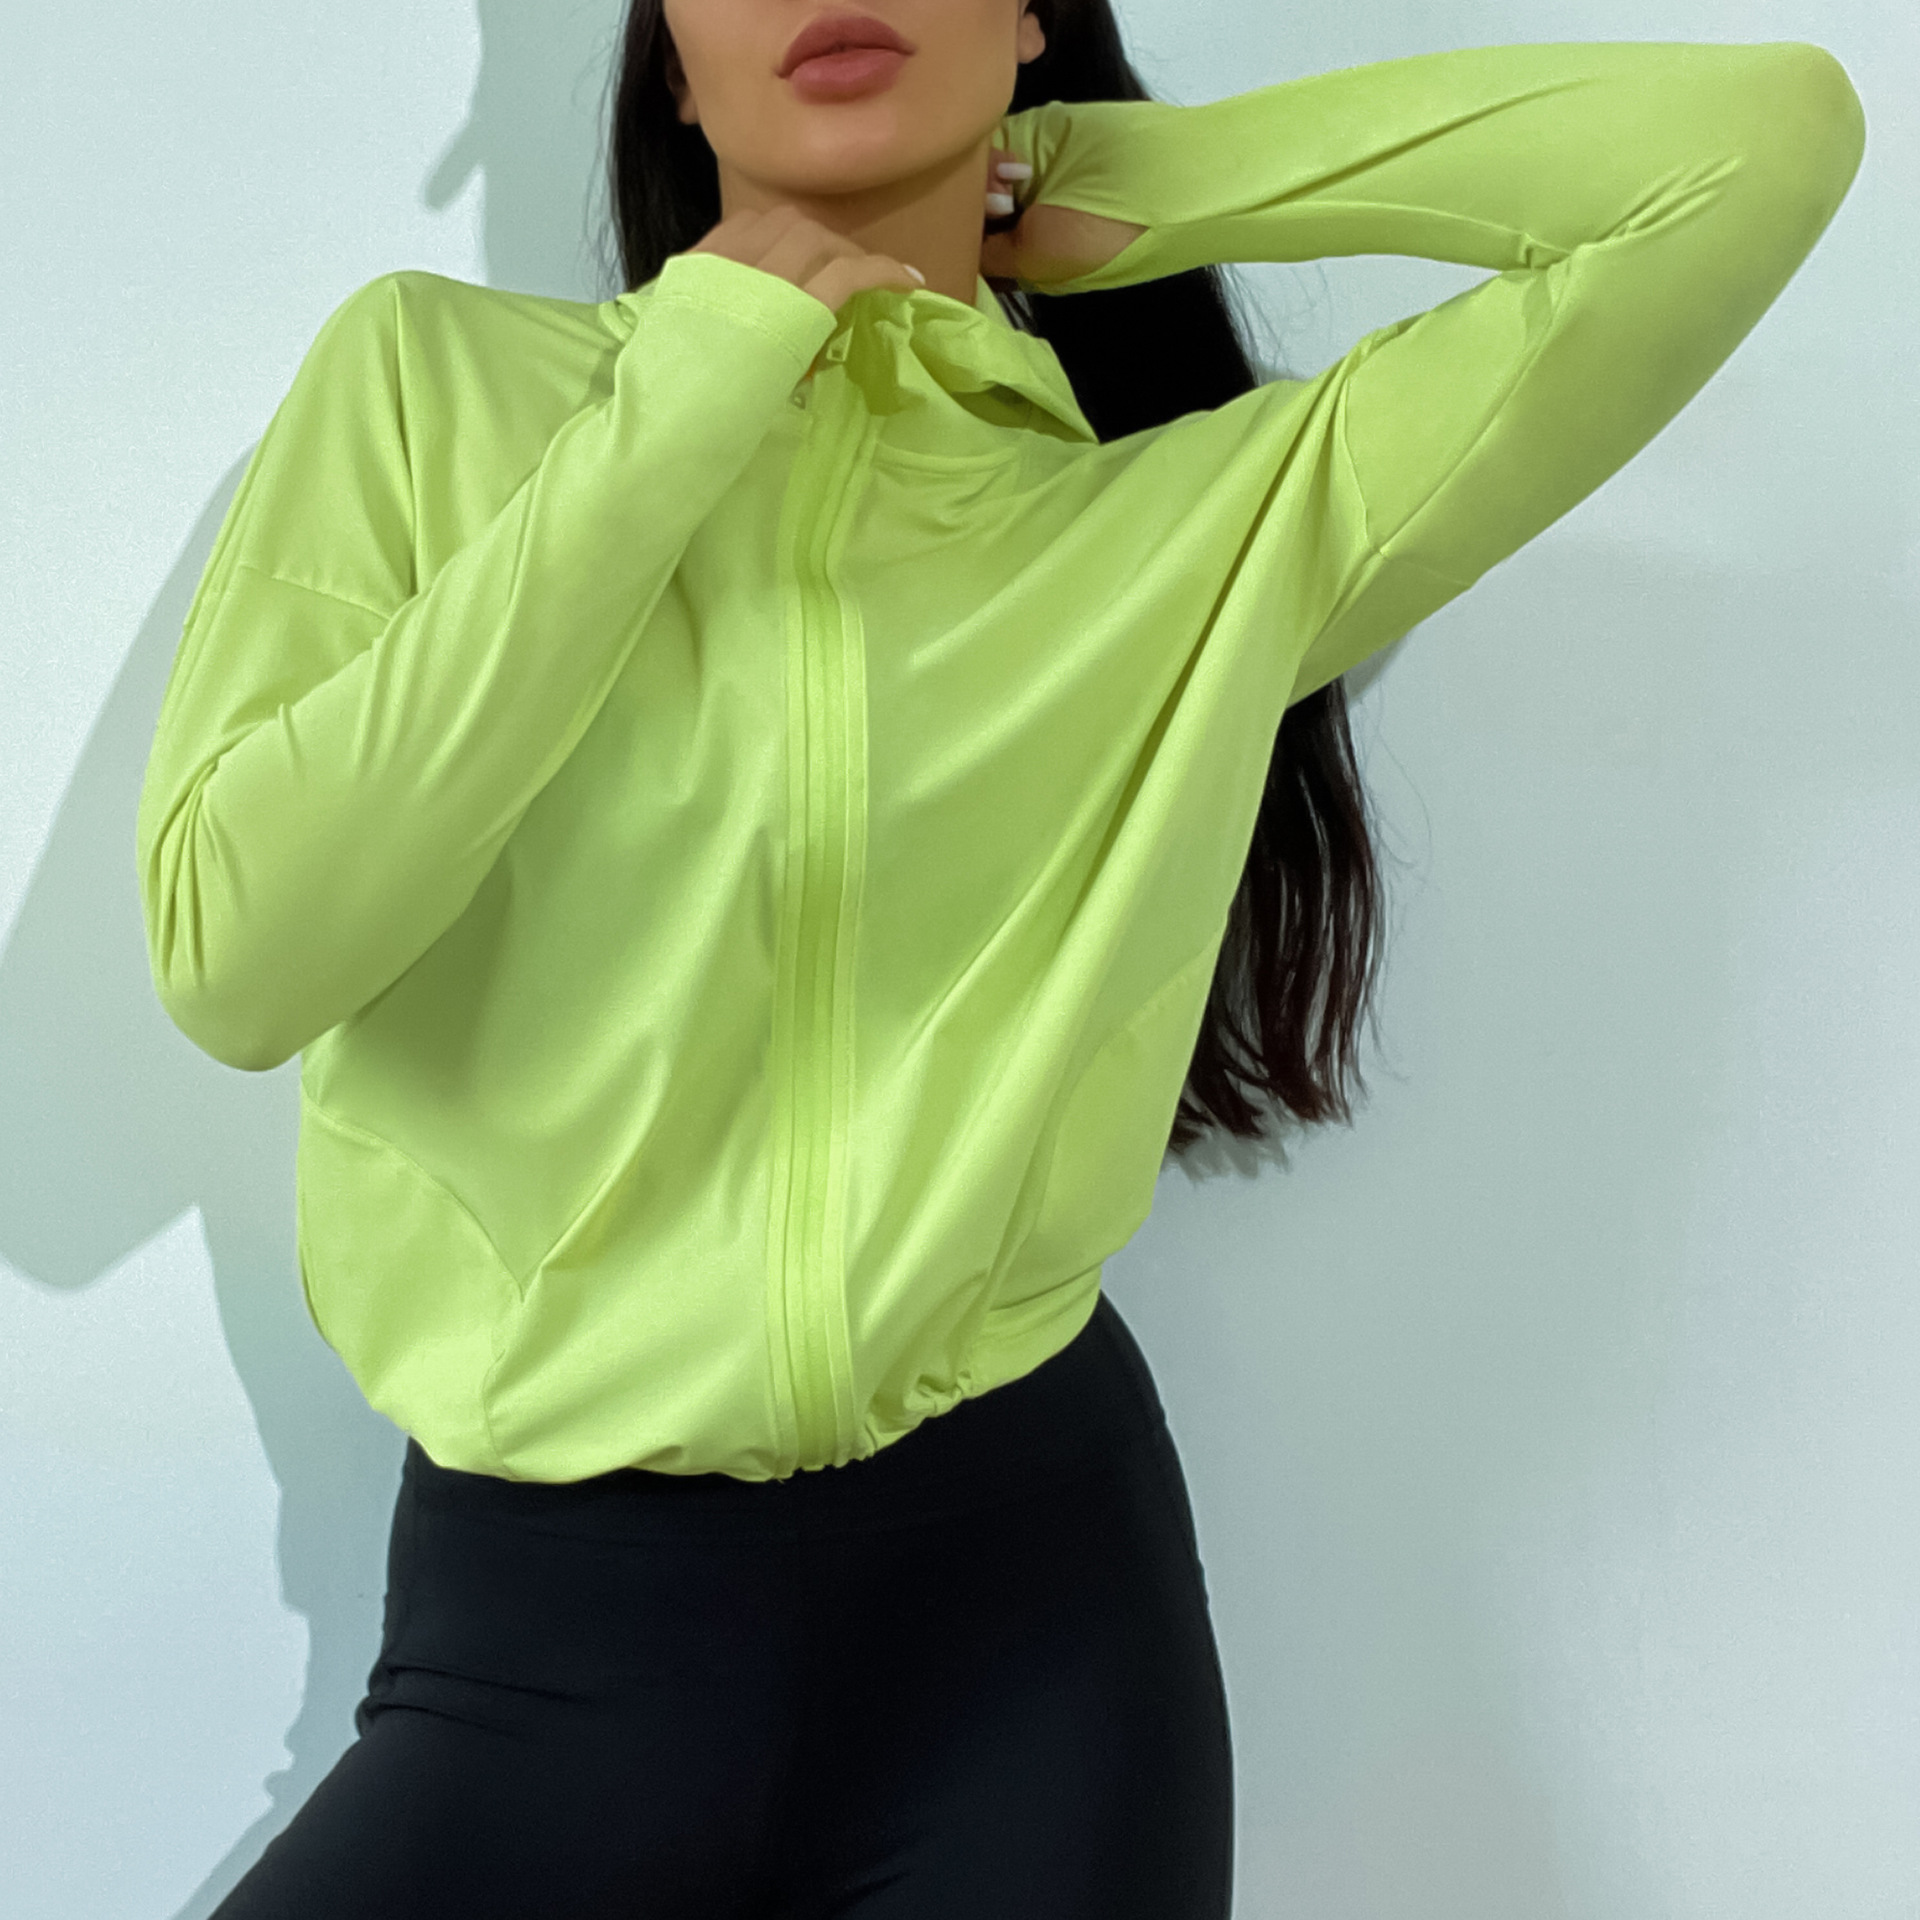 green workout jacket for women